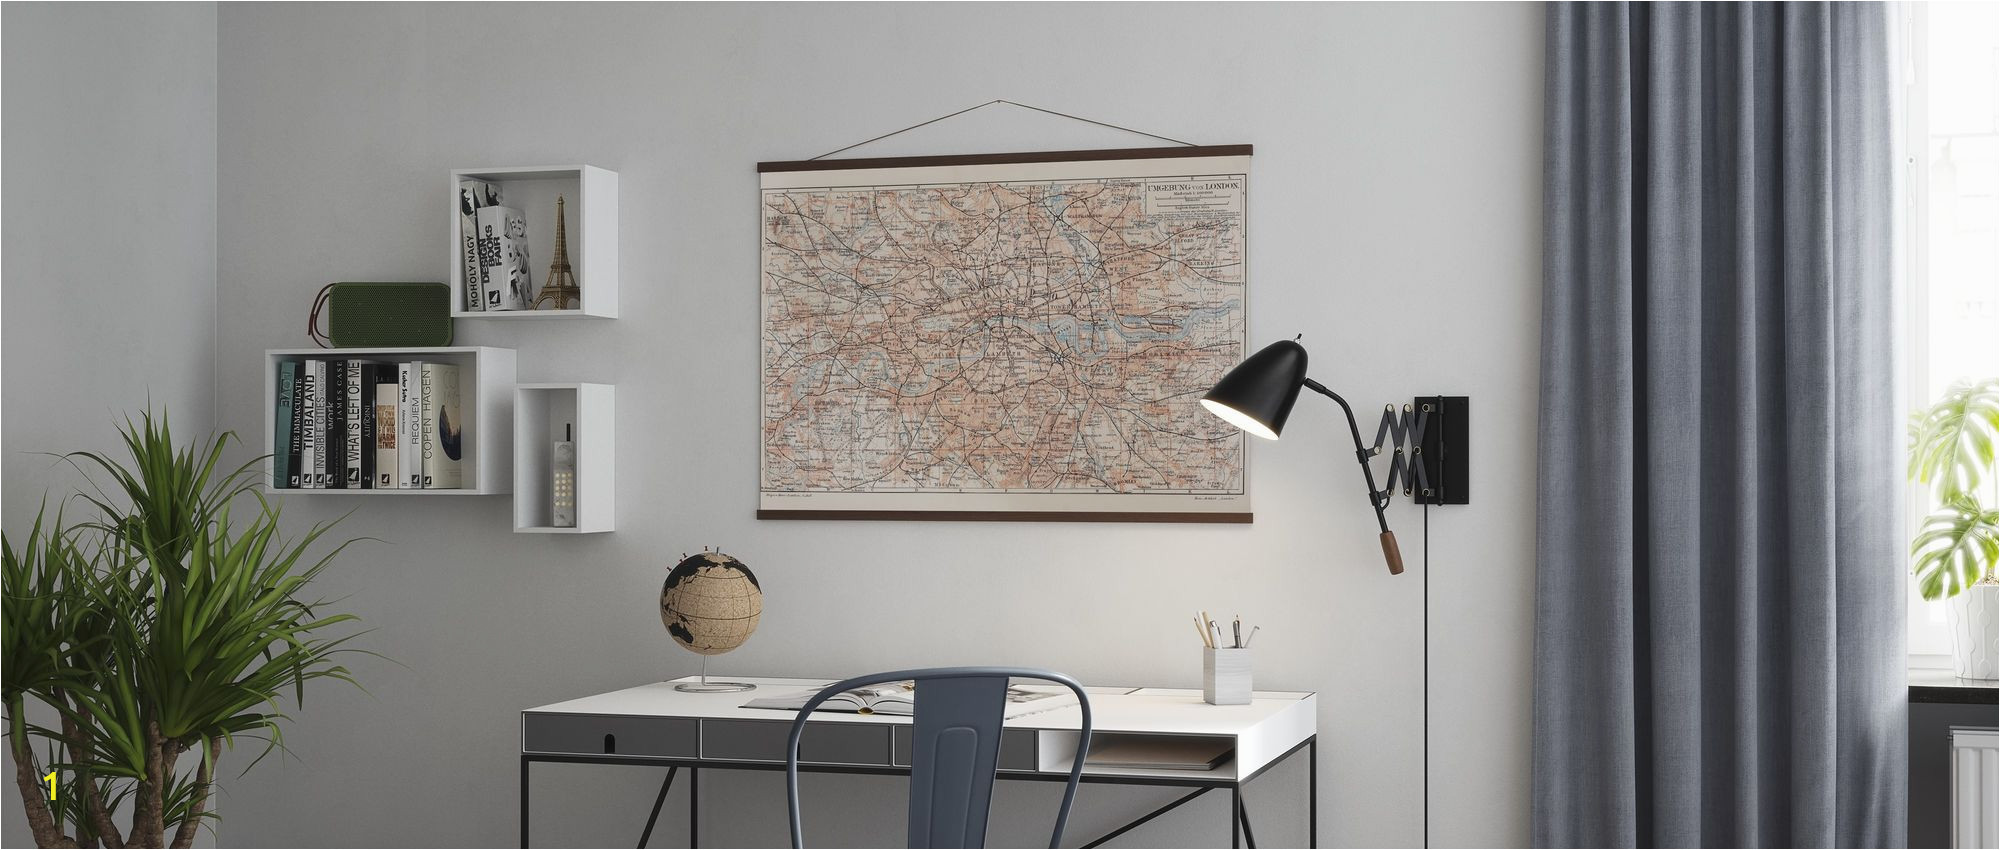 London Map Wall Mural London Map High Quality Poster Wall